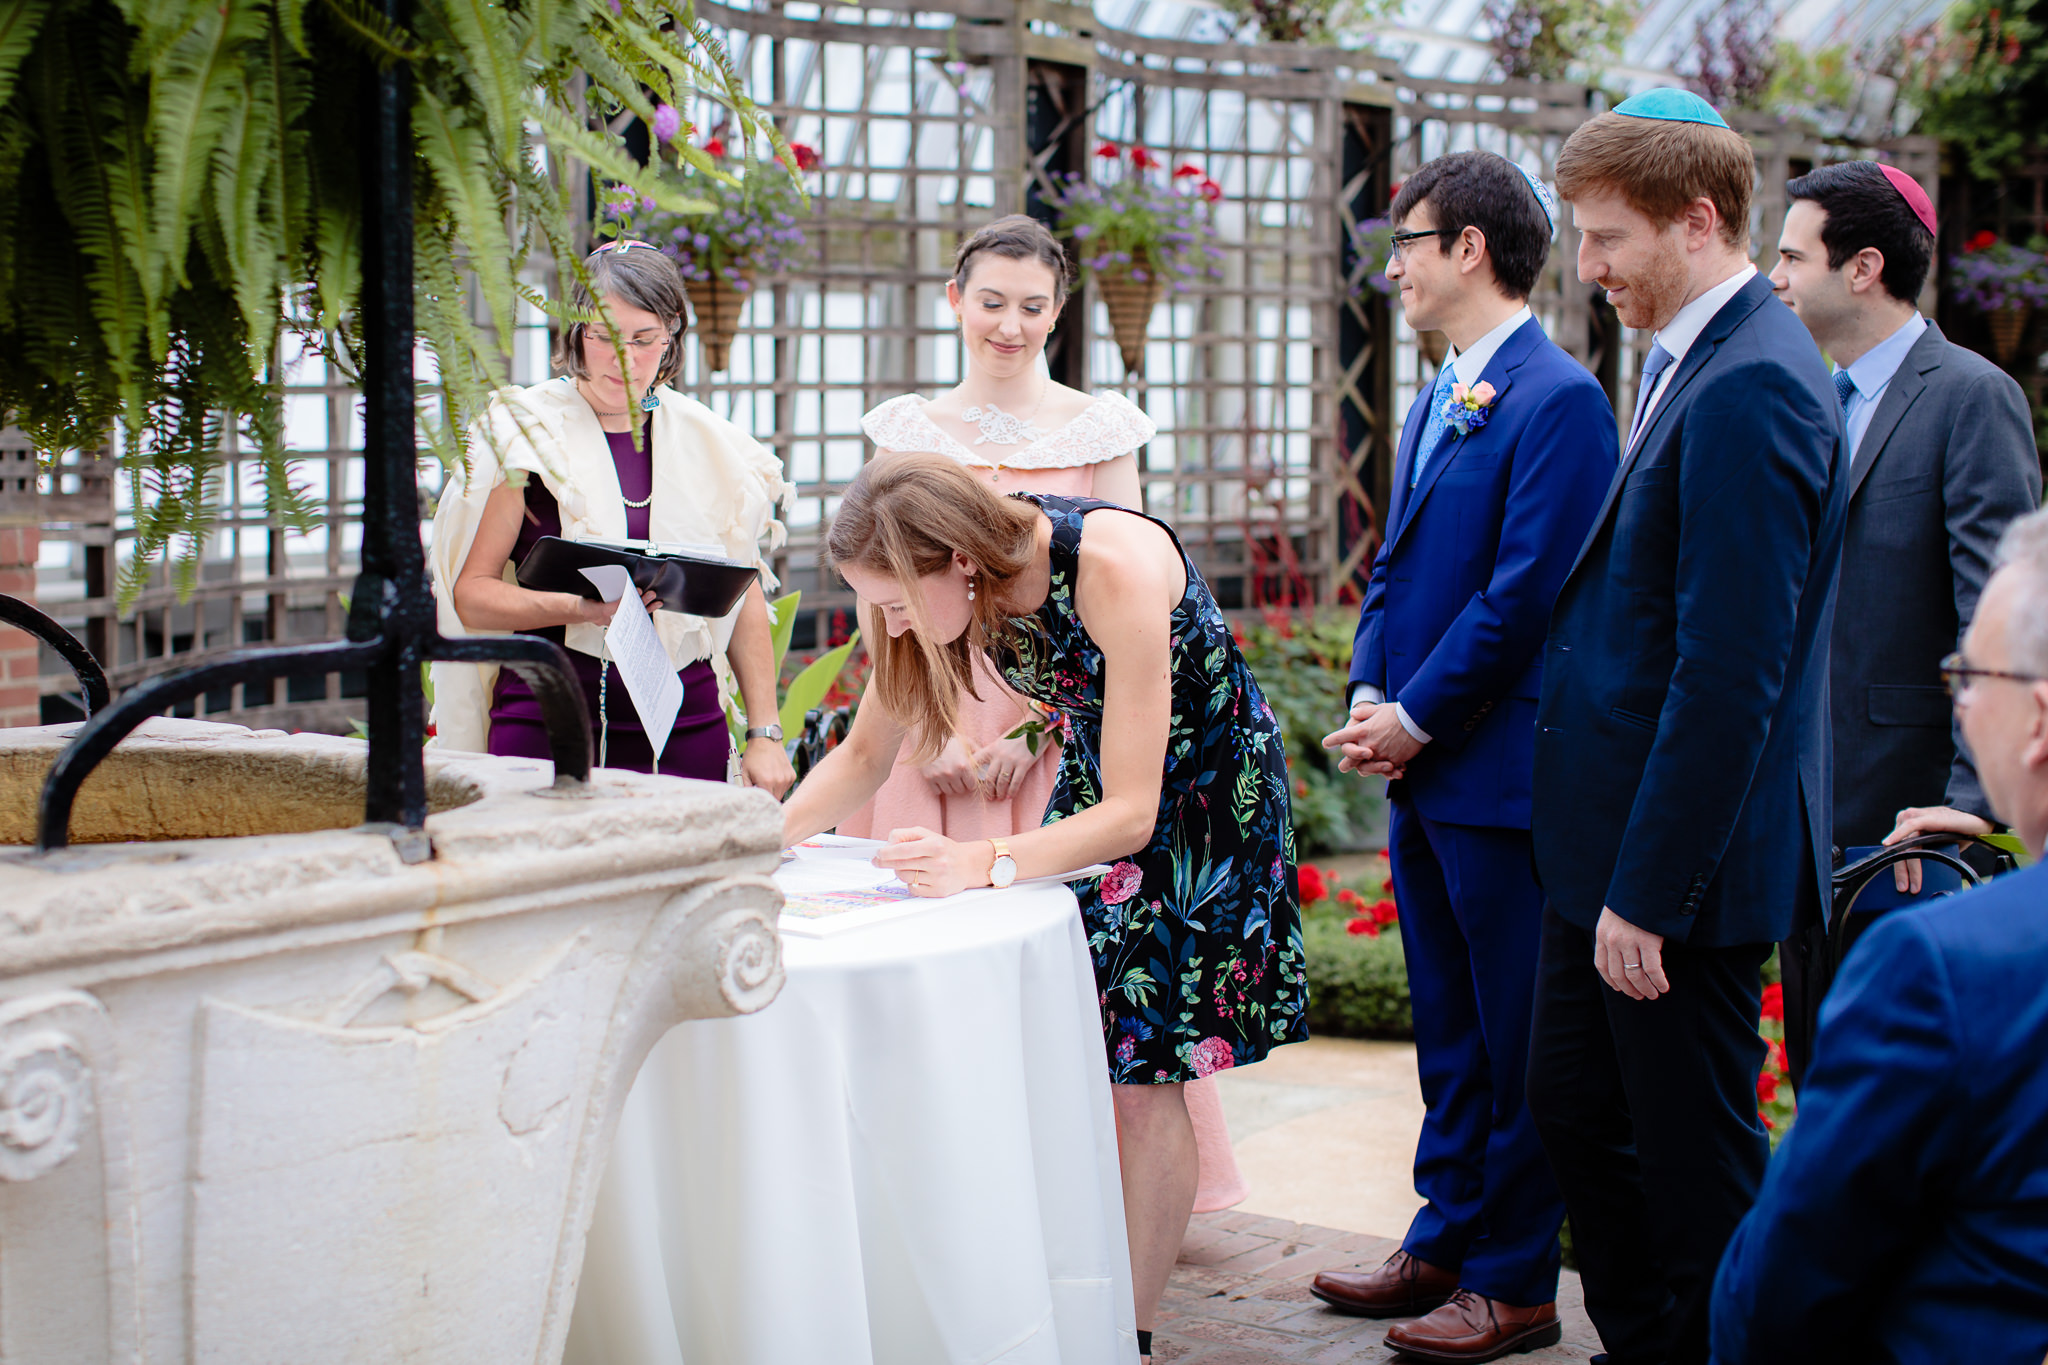 Bridal party & family looks on as female witness signs the Ketubah at Phipps Conservatory